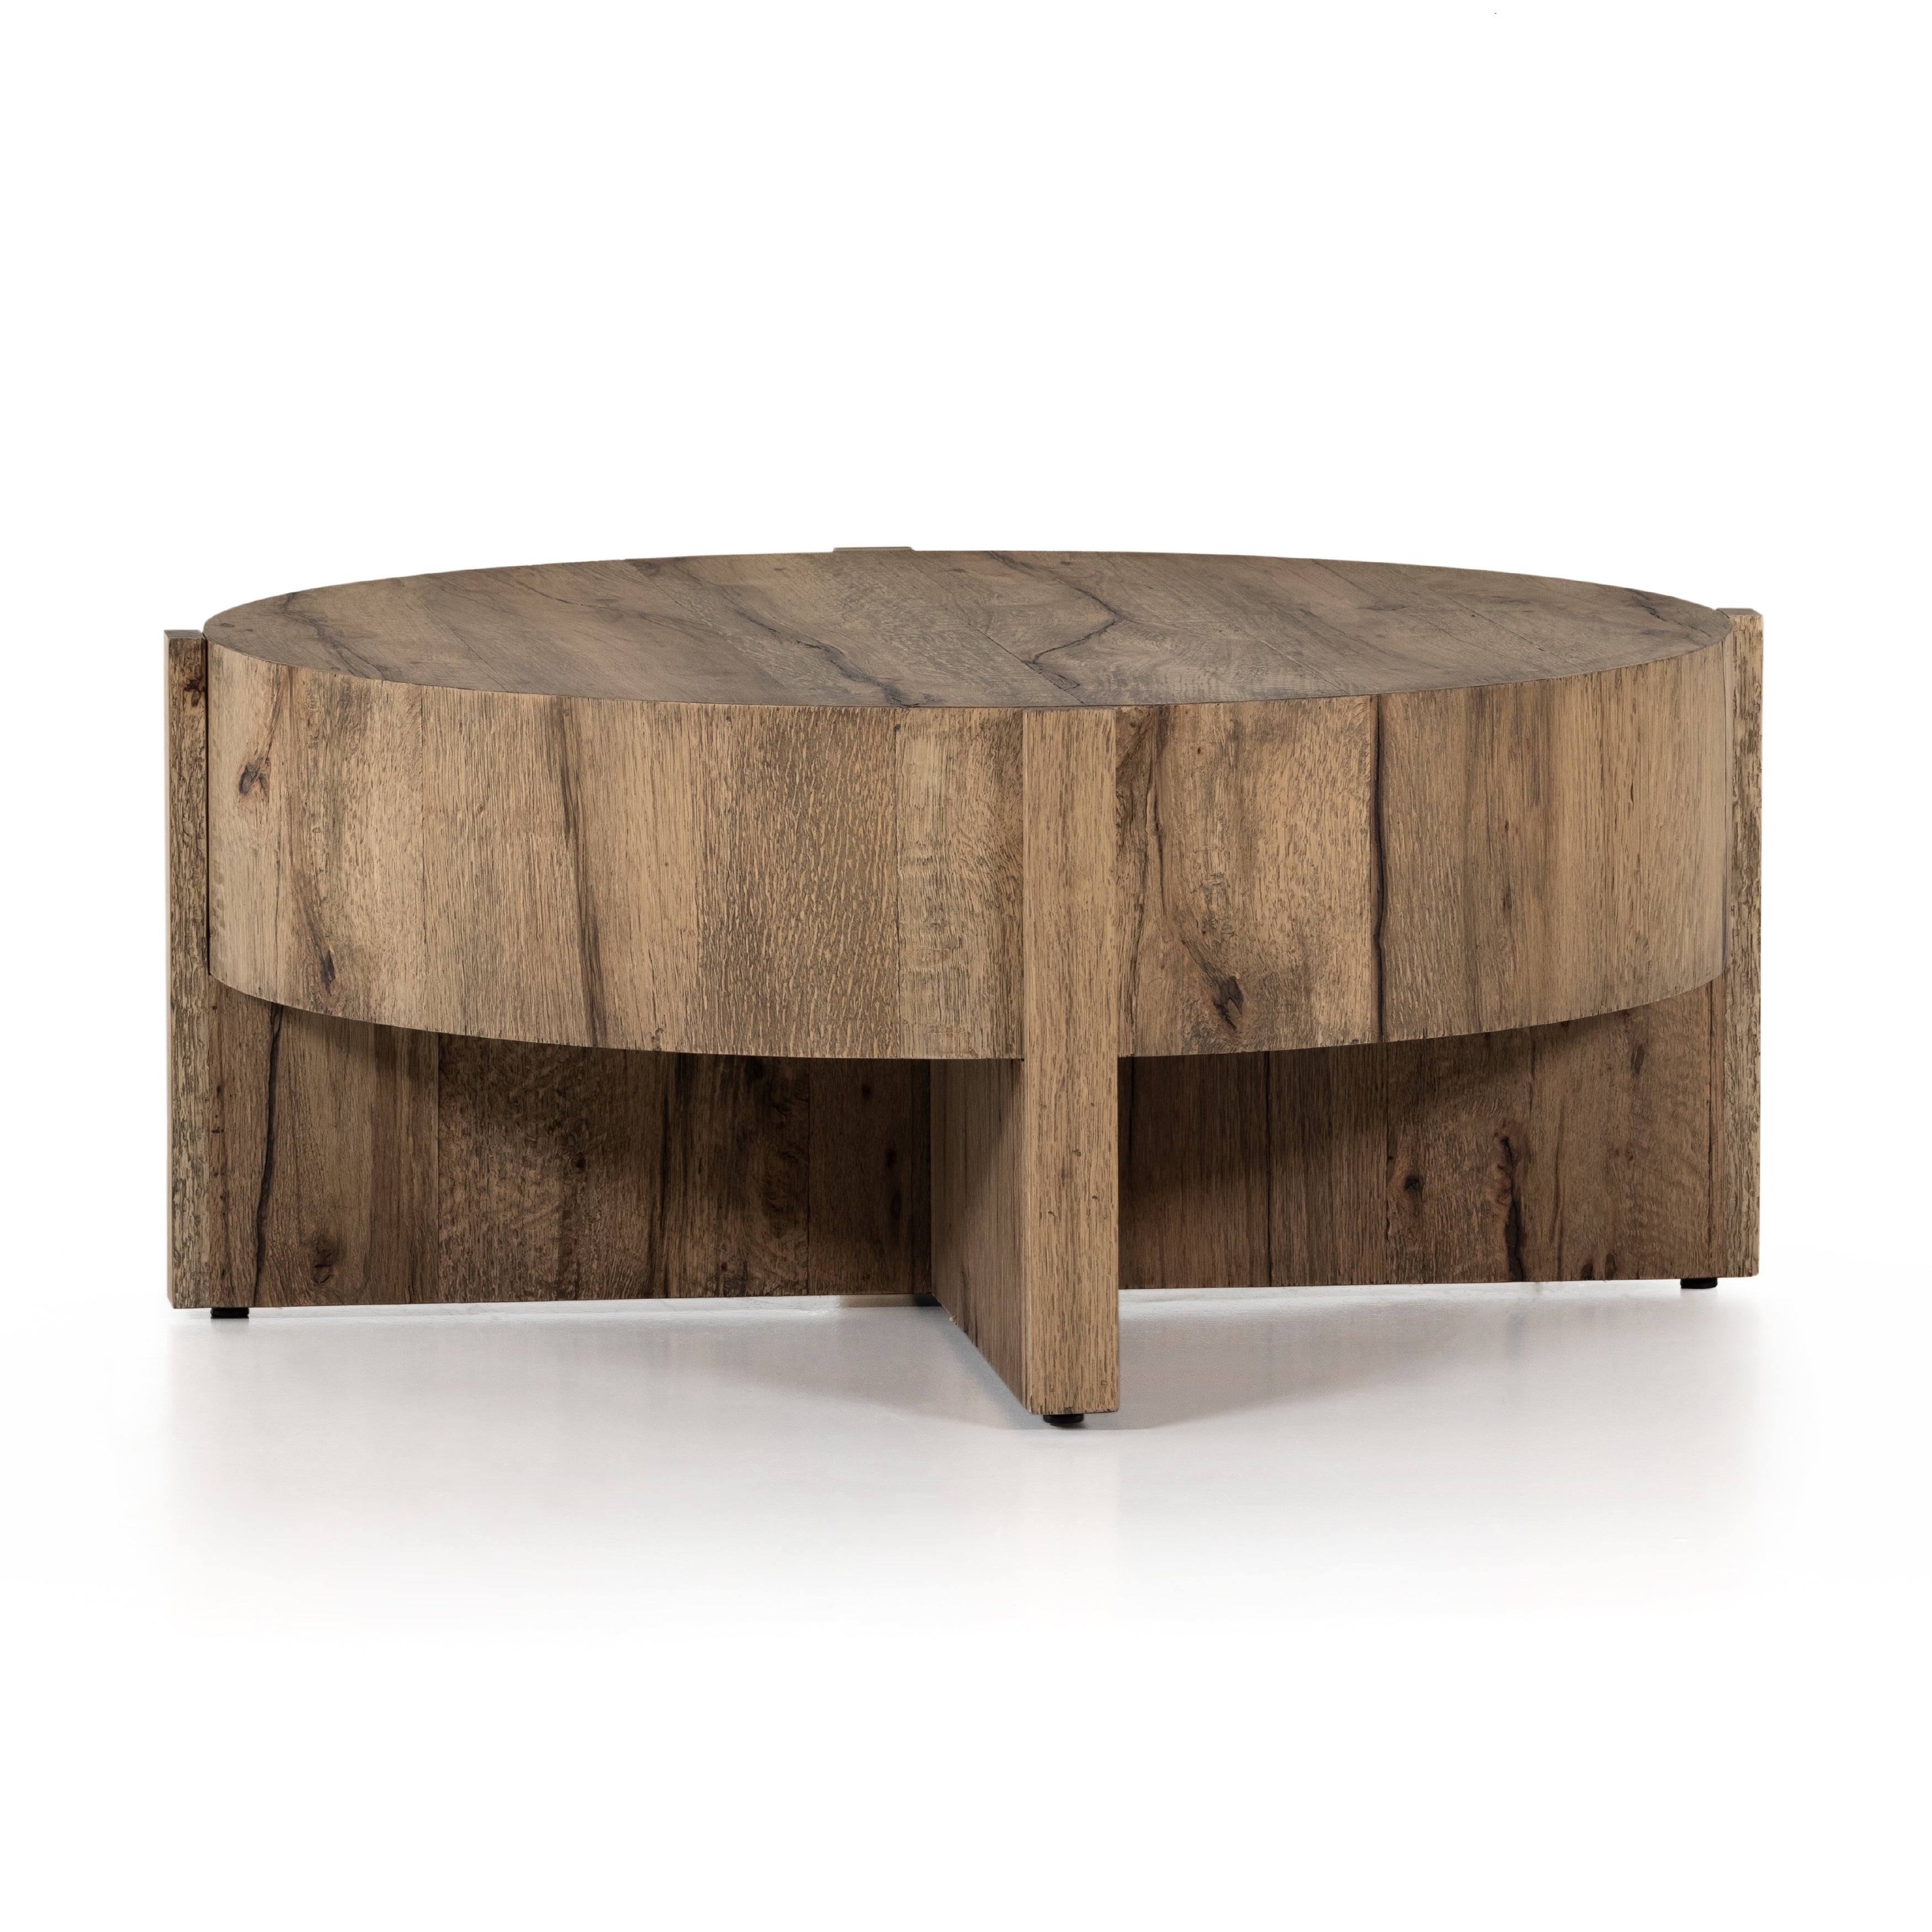 An organic-spirited statement piece. A drum-style coffee table of character-rich oak and veneers rests within a sculptural cradle base of matching rustic oak with beautiful highs and lows. Amethyst Home provides interior design, new construction, custom furniture, and area rugs in the Washington metro area.